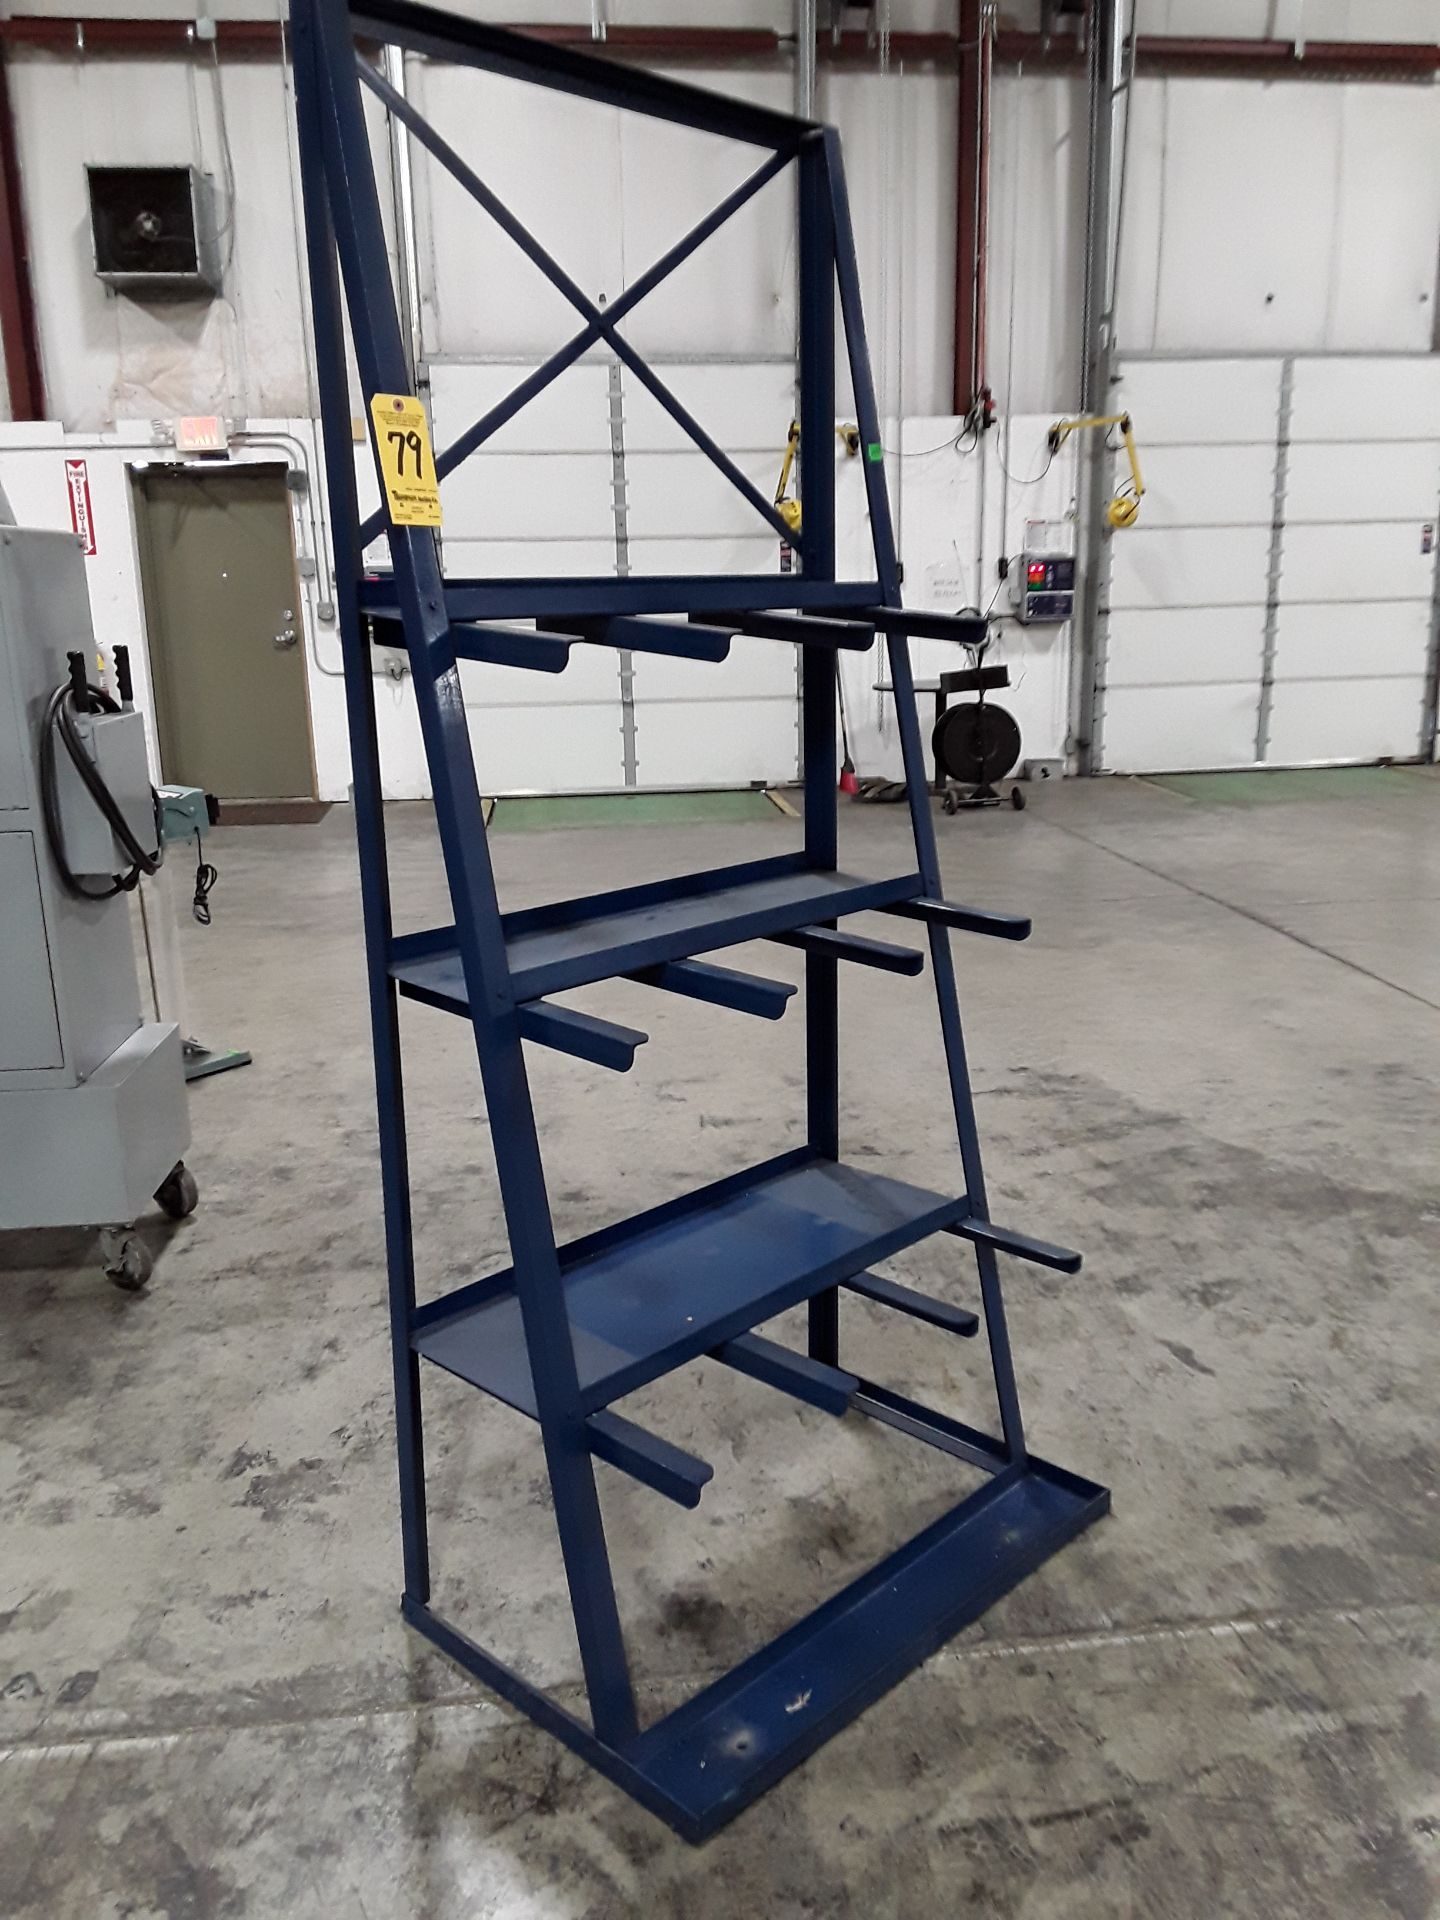 Cantilever Storage Rack, 7' High X 3' Wide X 2' Deep, Address for Inspection and Pick Up 3040 N.